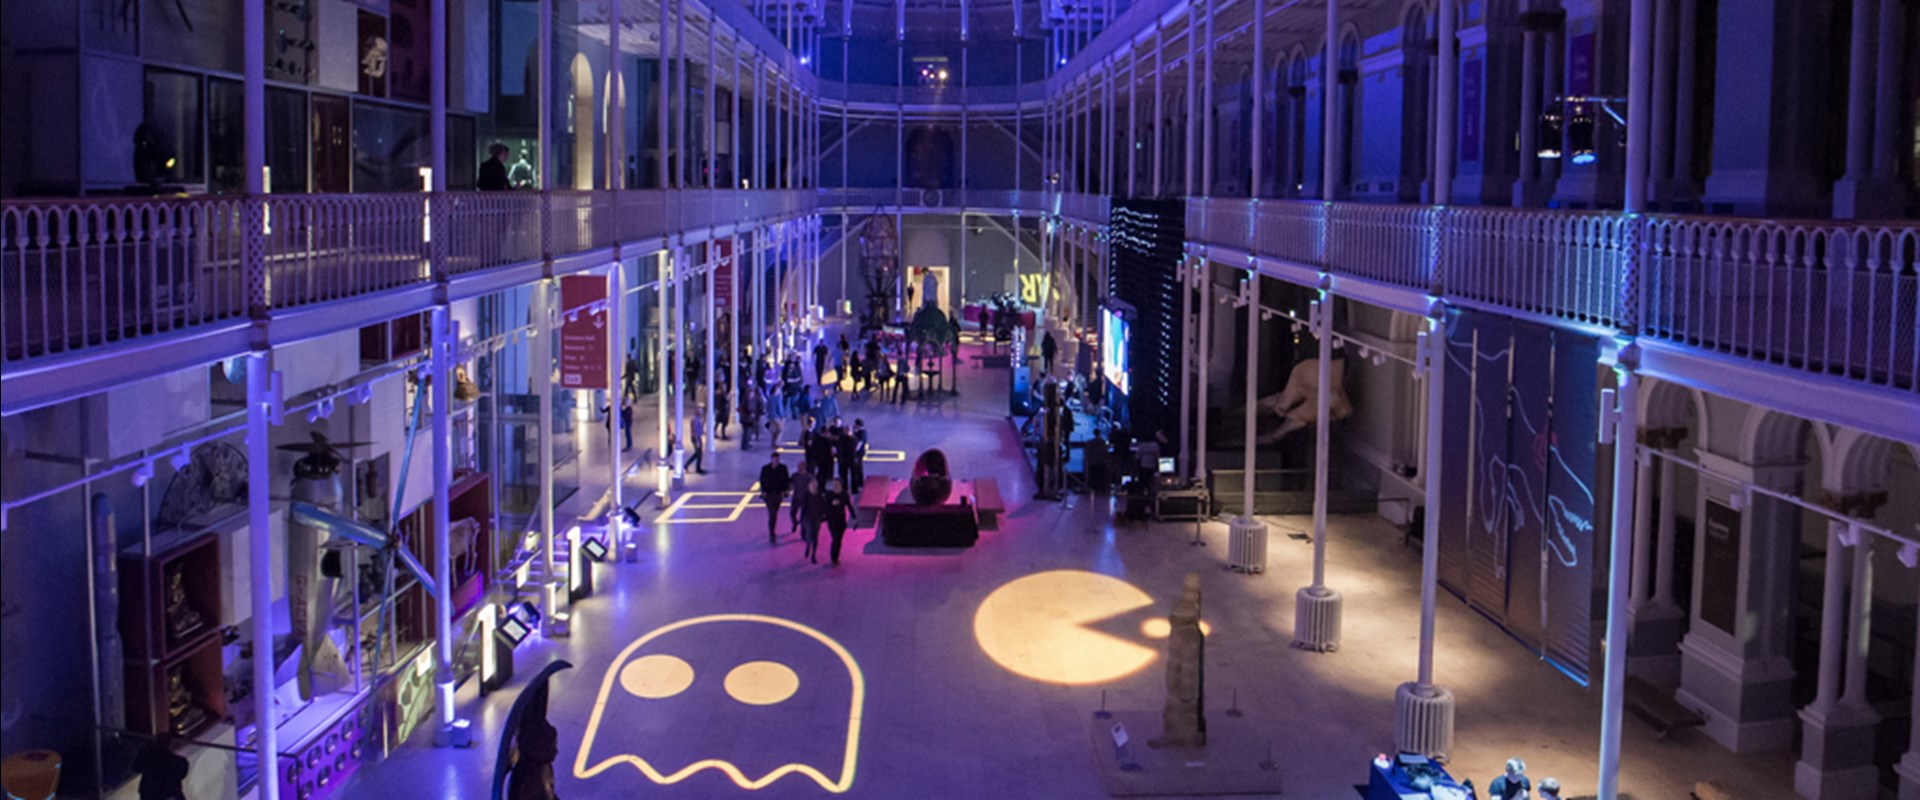 The Grand Gallery at night, with dark purple and pink lighting and activities across the floor. Gaming shapes are projected onto the floor too.